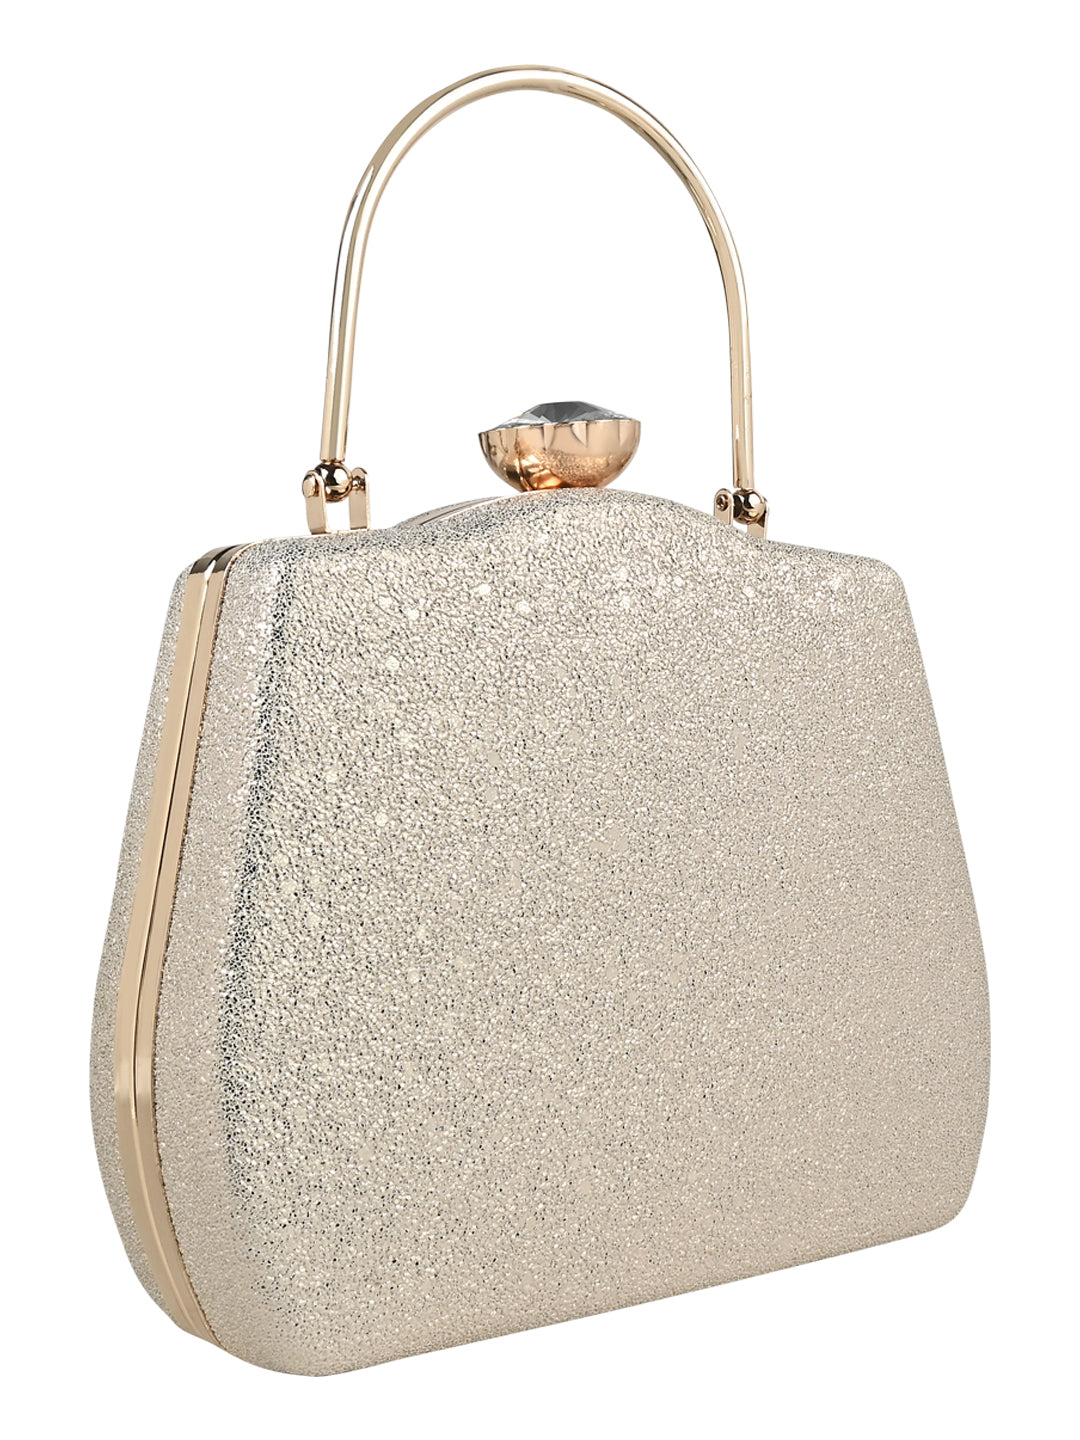 A Plain gold Vdesi clutch with a chain handle and shiny surface.